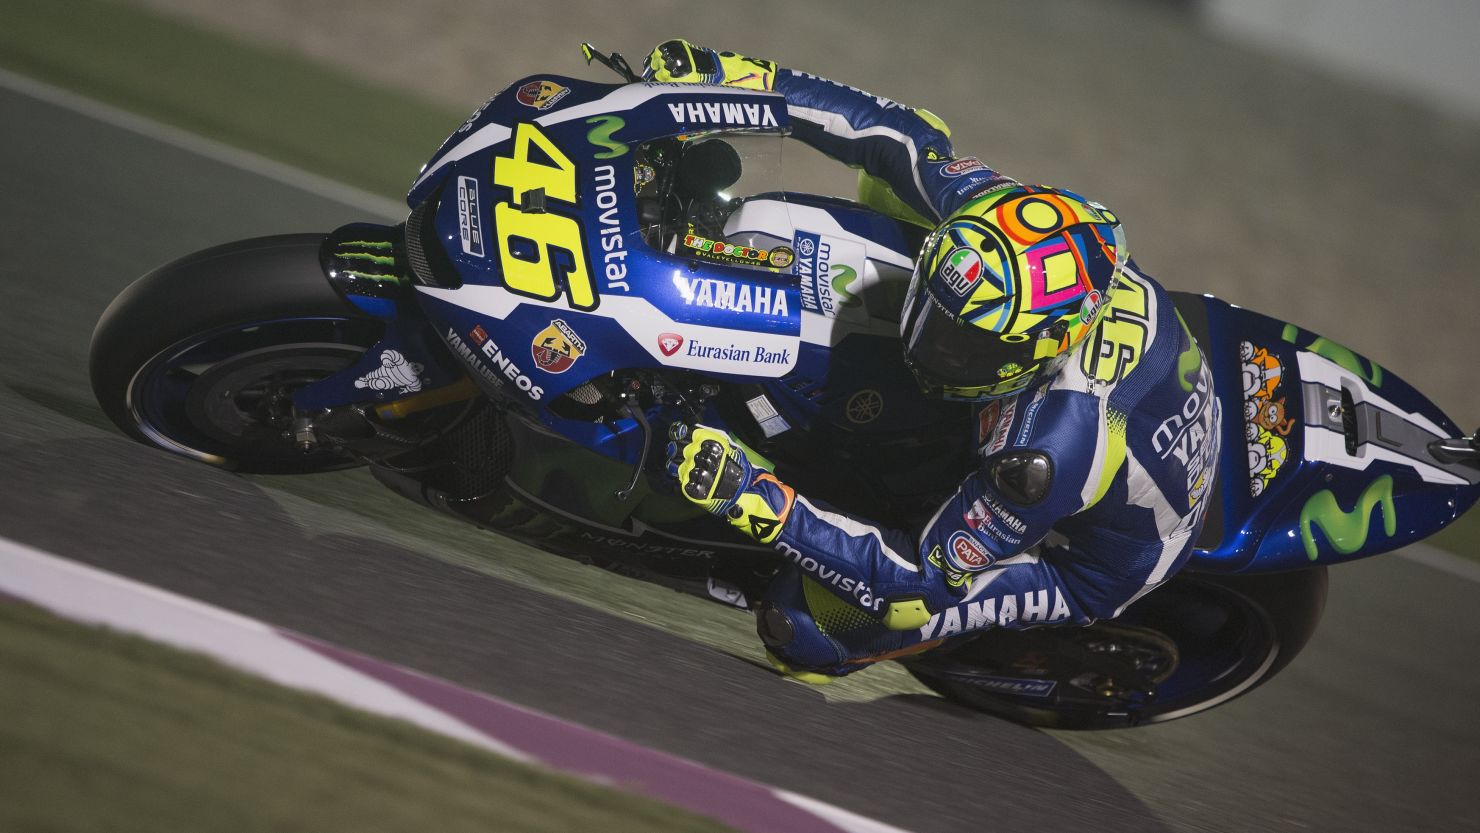 Valentino Rossi rounds a bend during the MotoGP of Qatar free practice session at the Losail Circuit.